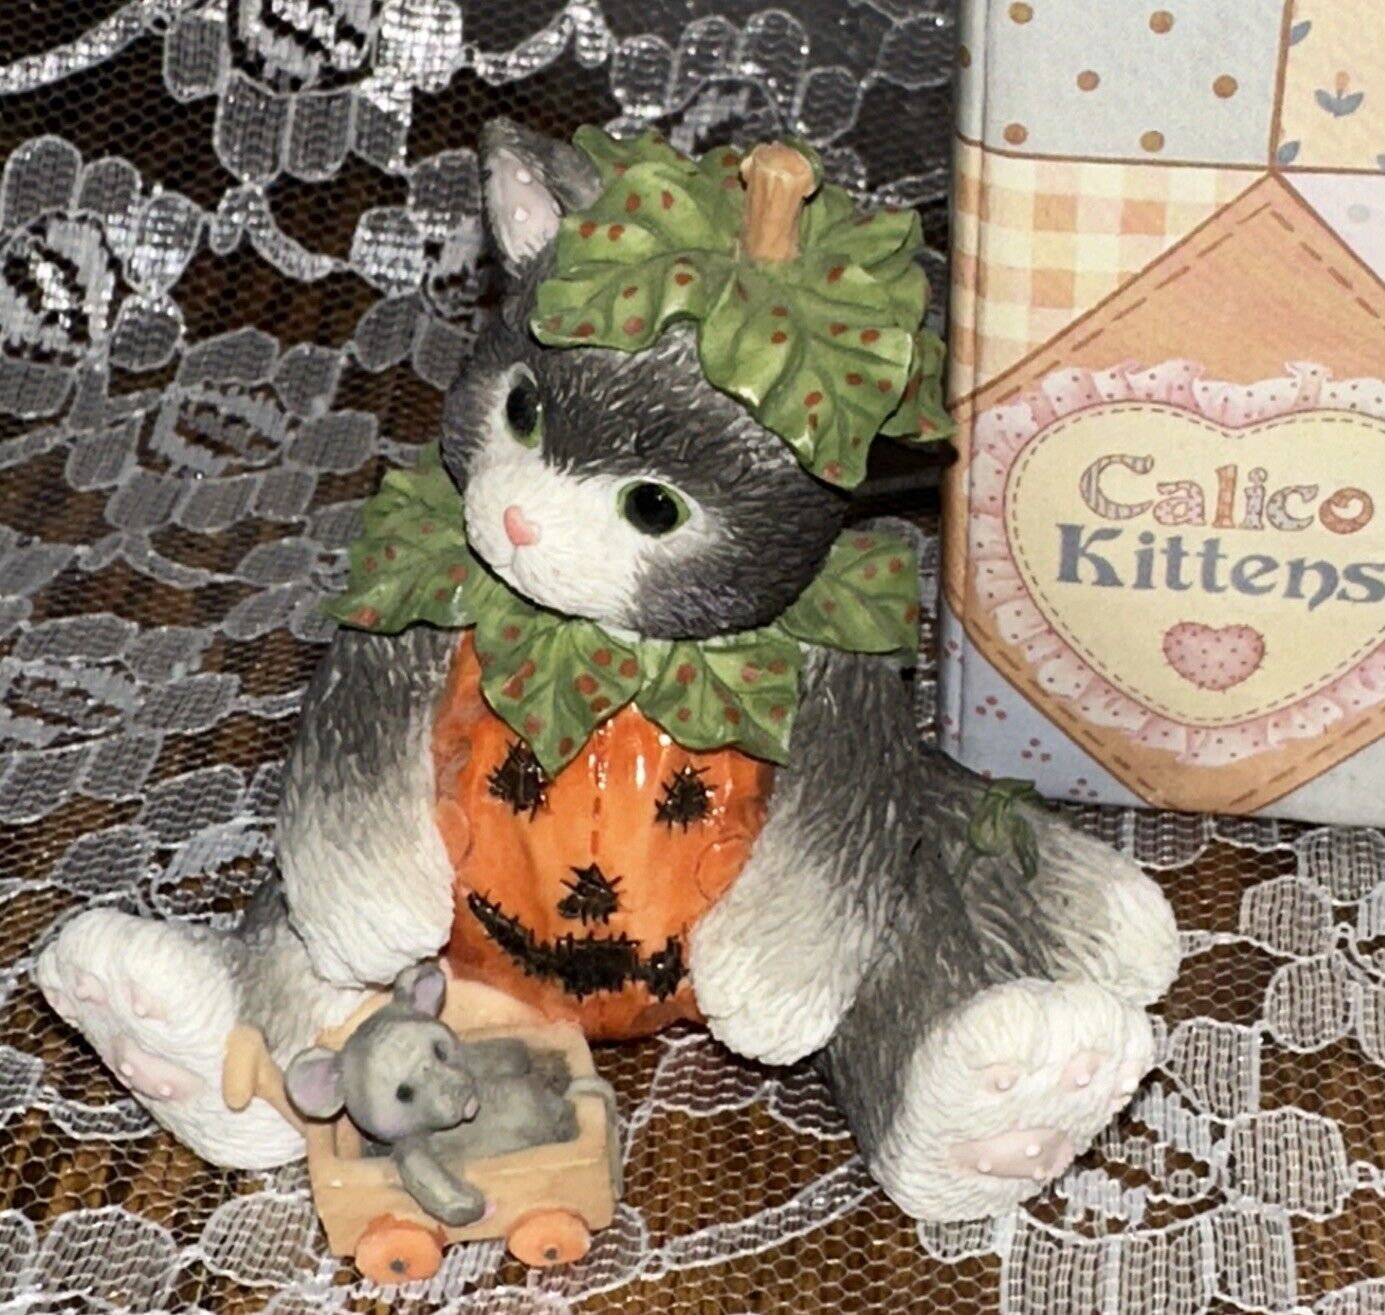 Enesco Calico Kittens 1995 Halloween w/ box “We’ve Carved A Perfect Friendship”